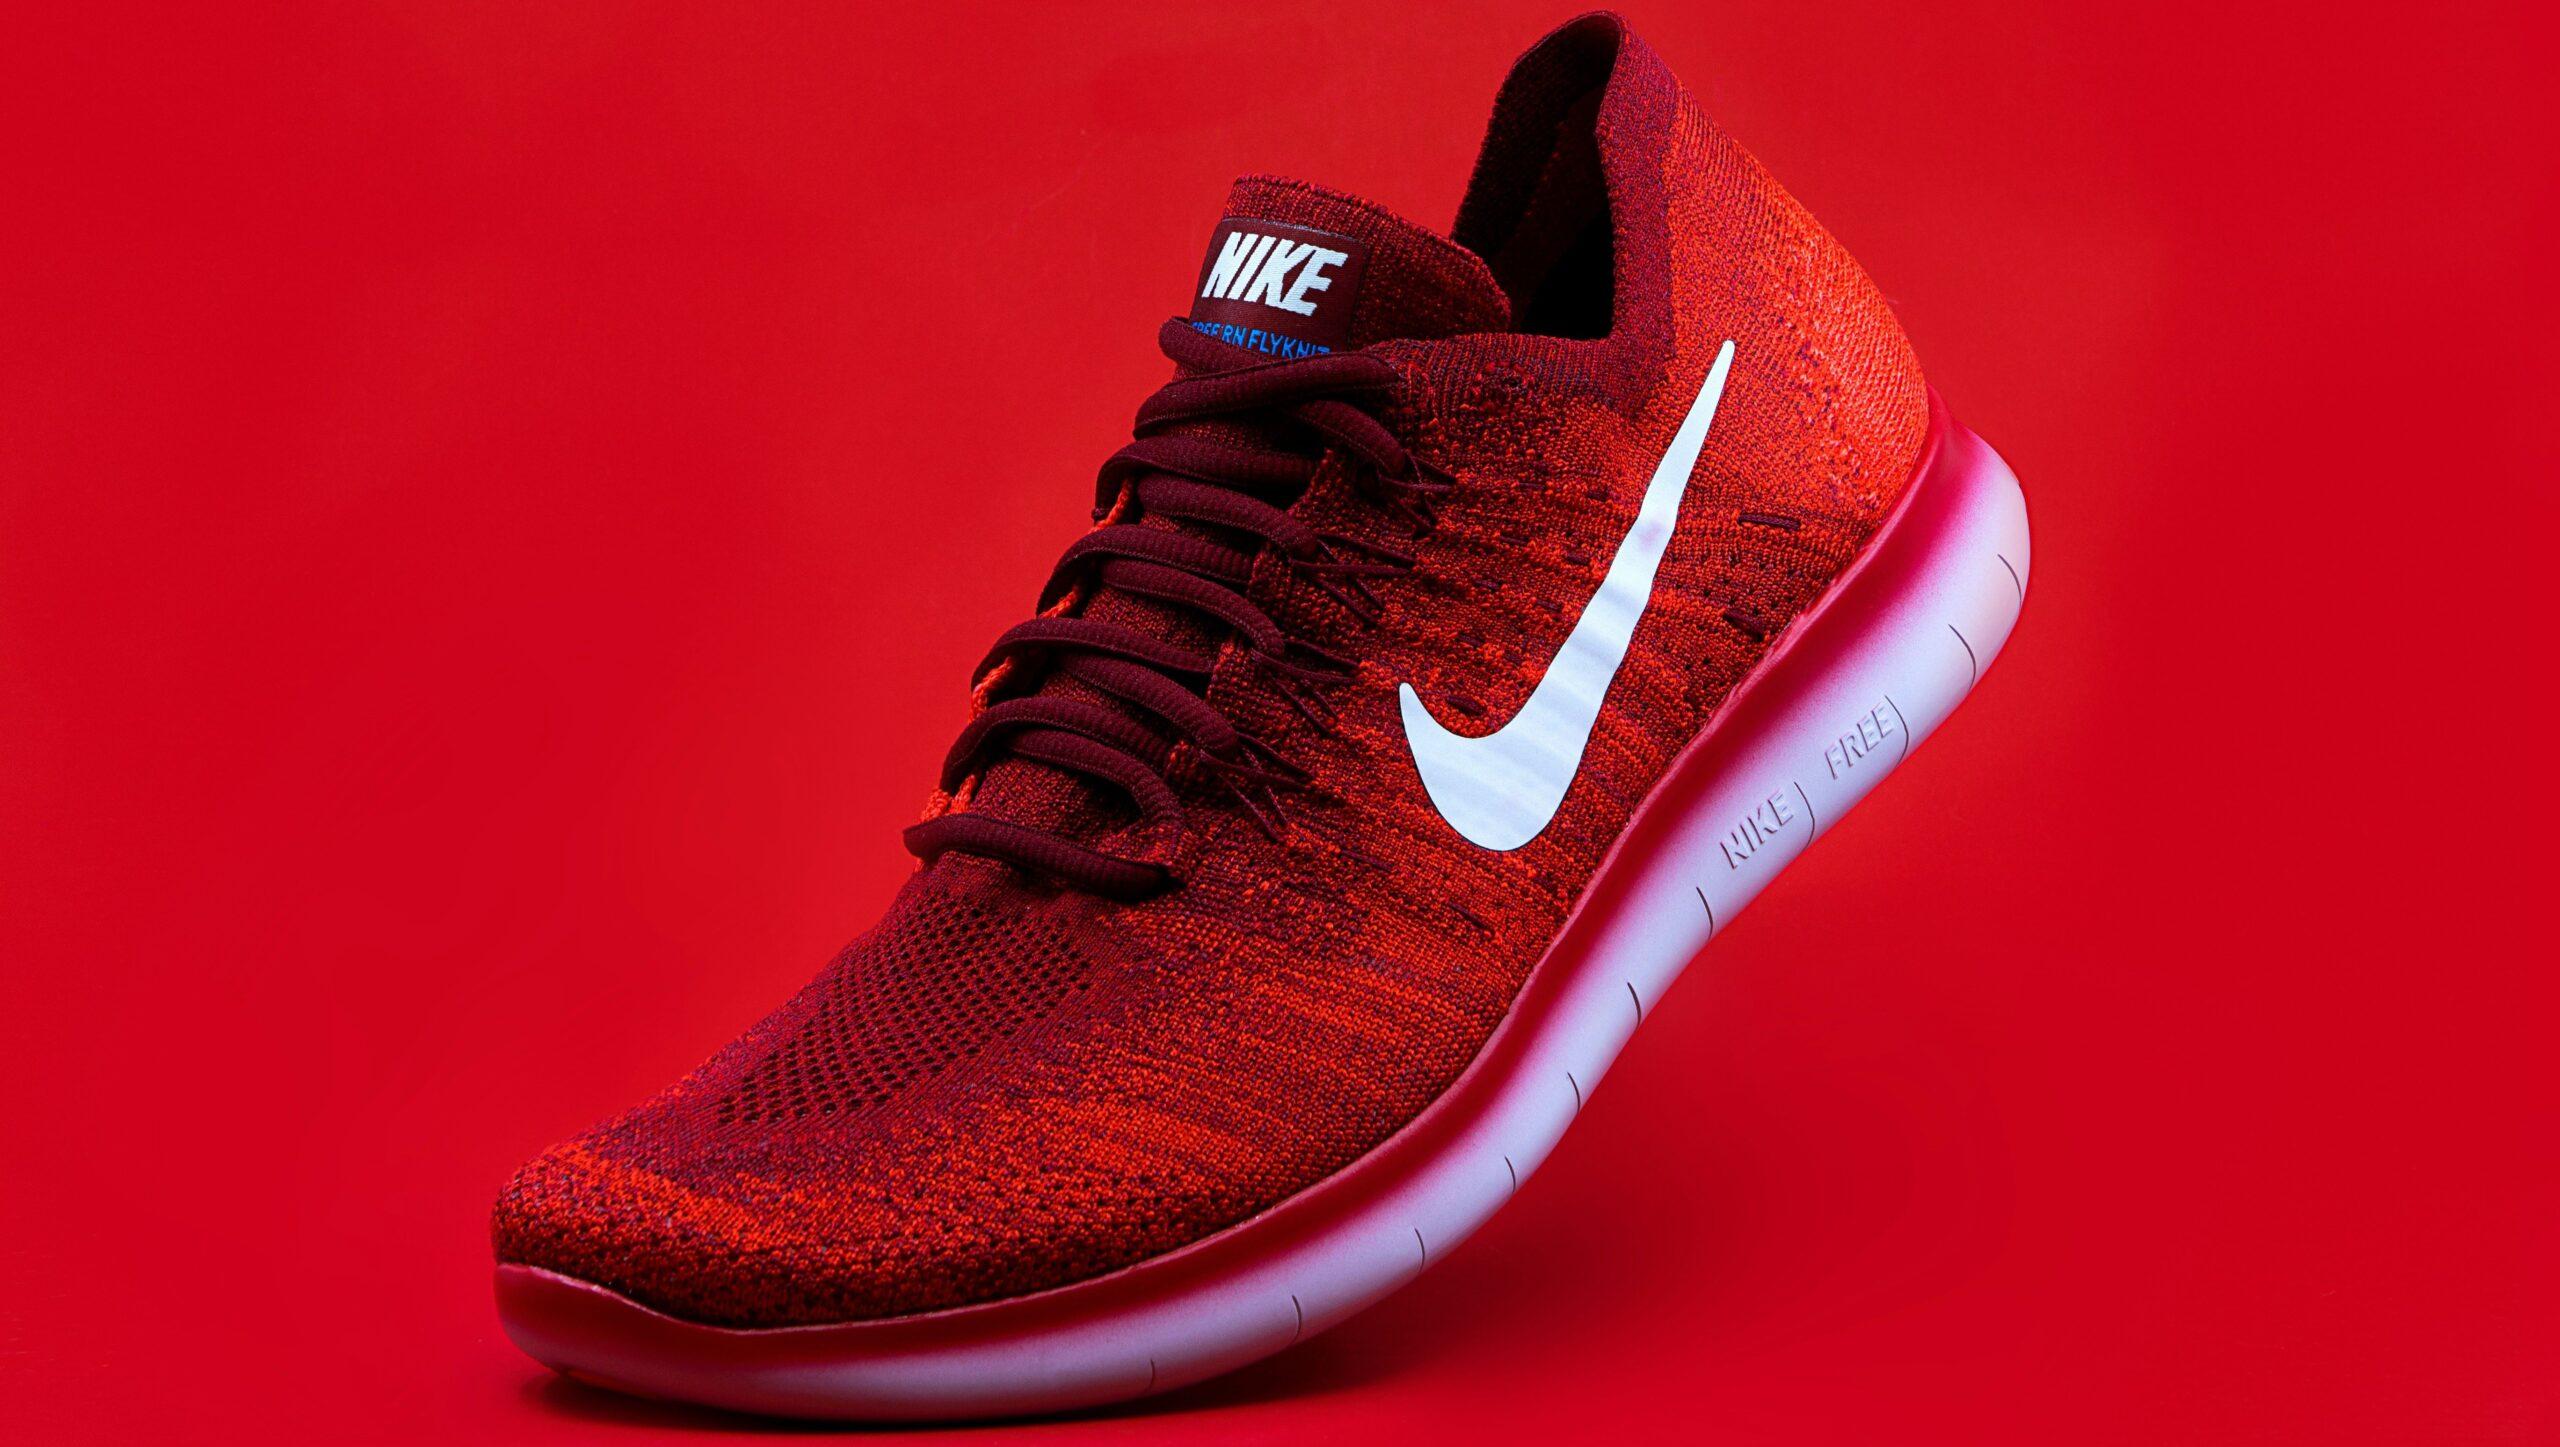 A red Nike shoe against a red background.